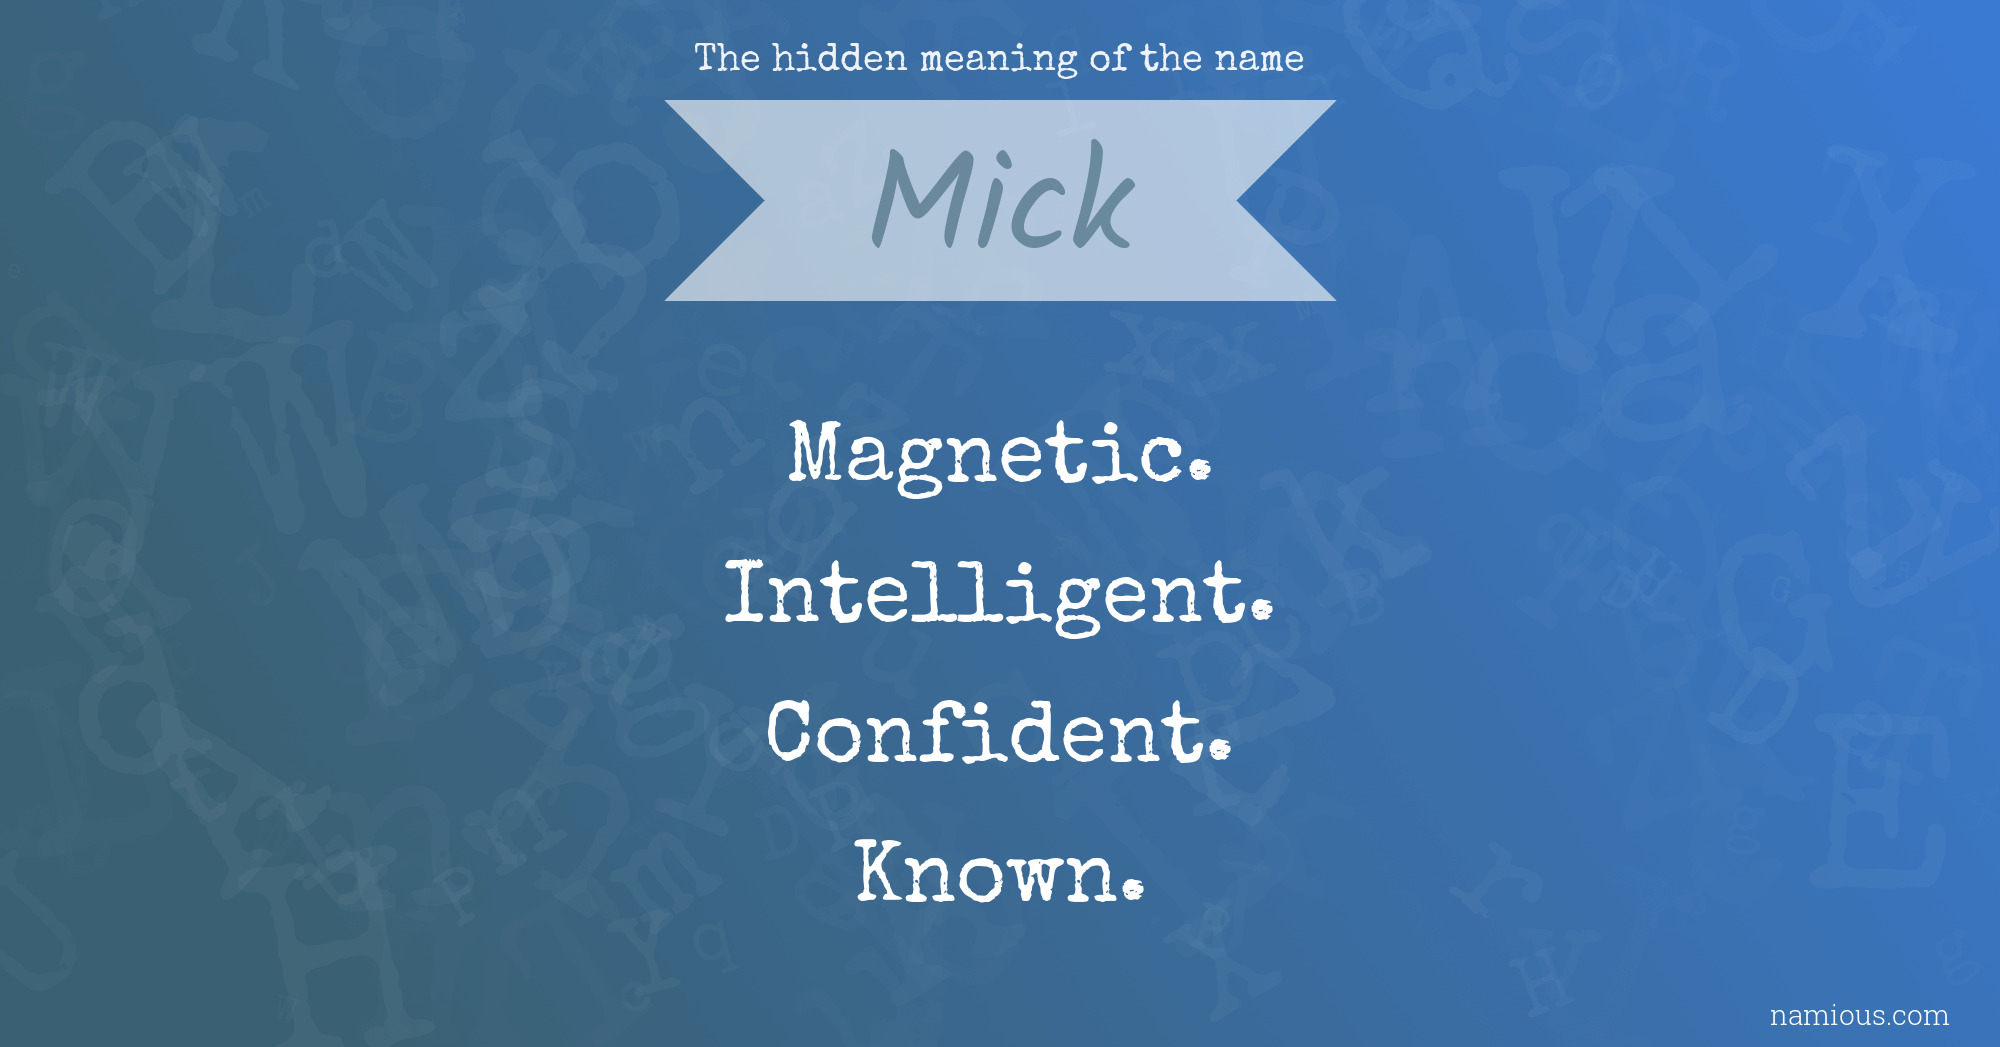 The hidden meaning of the name Mick